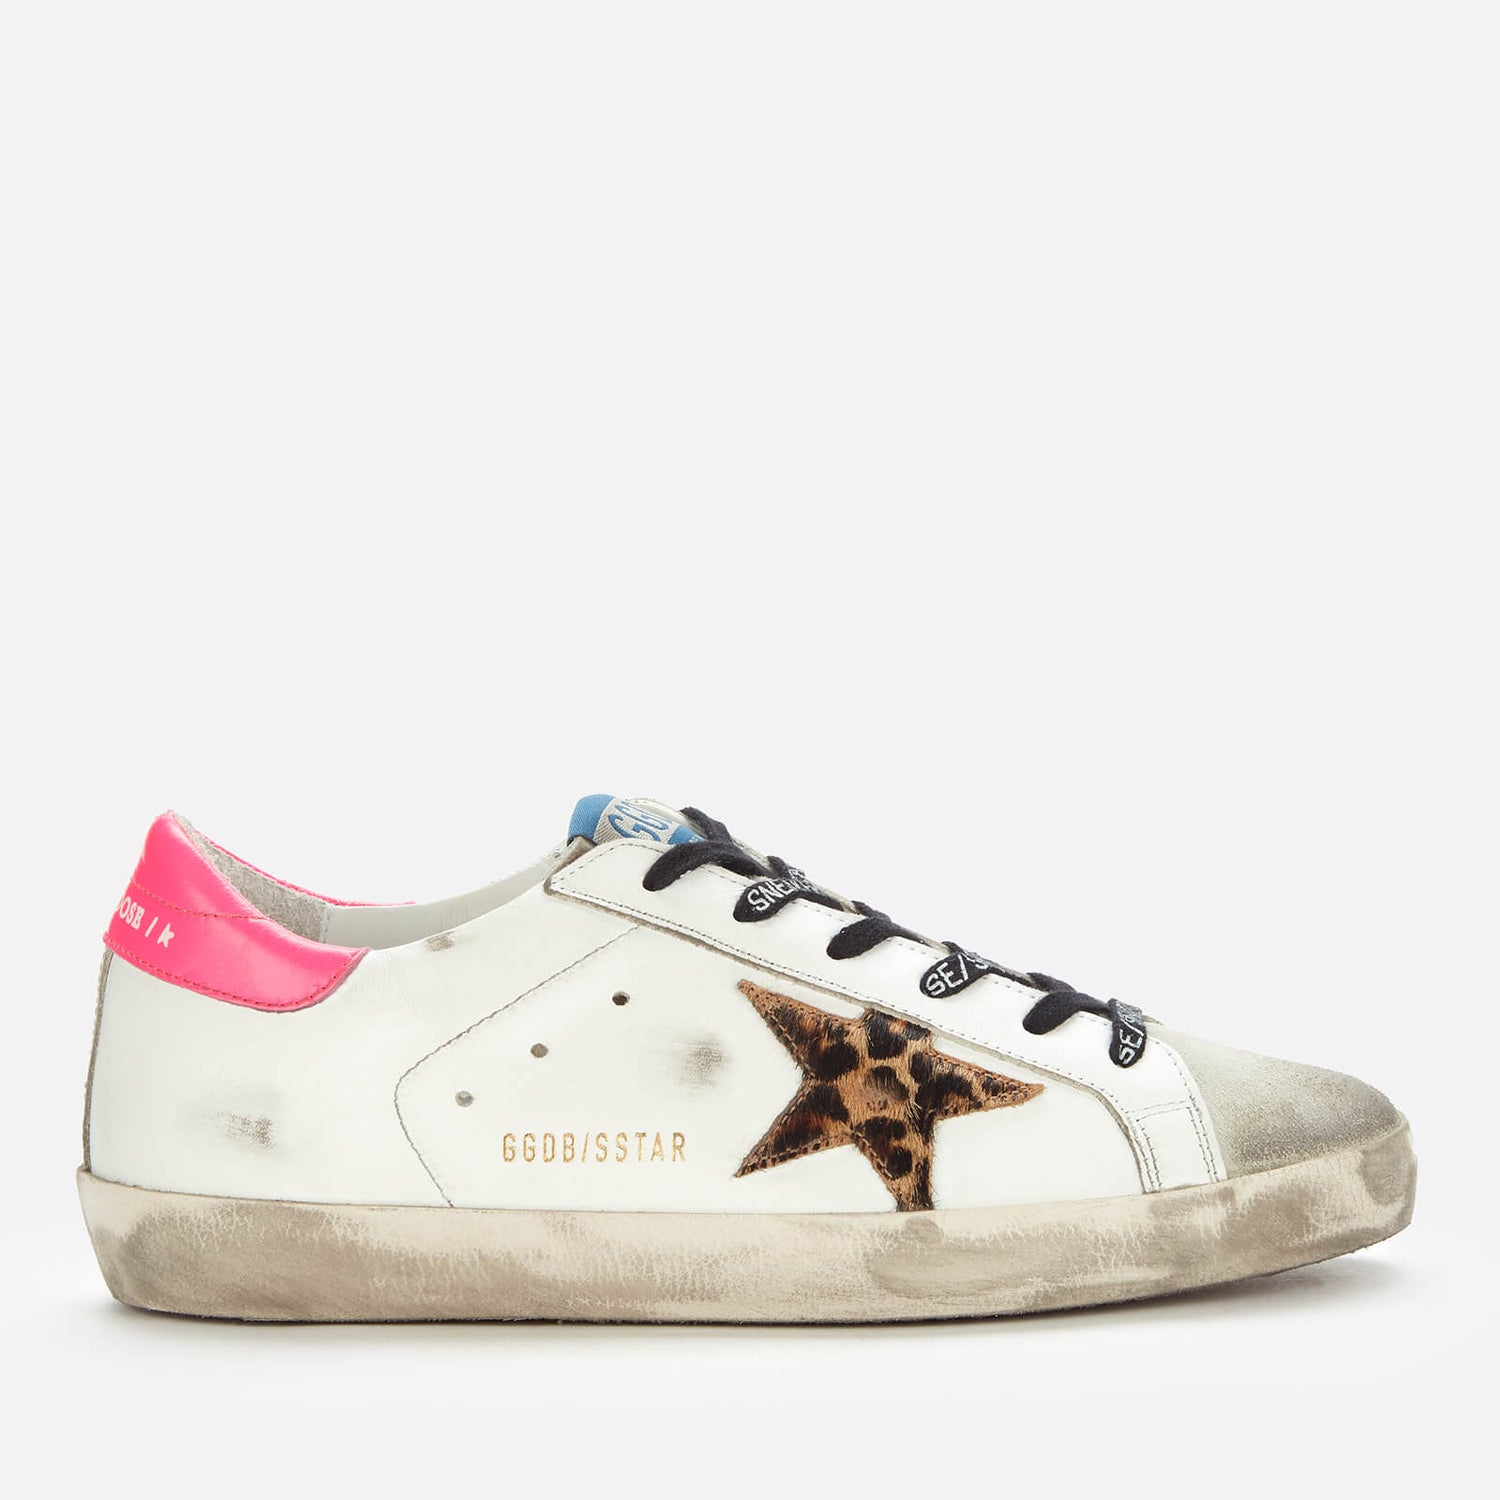 Golden Goose Women's Superstar Leather Trainers - Ice/White/Leopard - UK 8